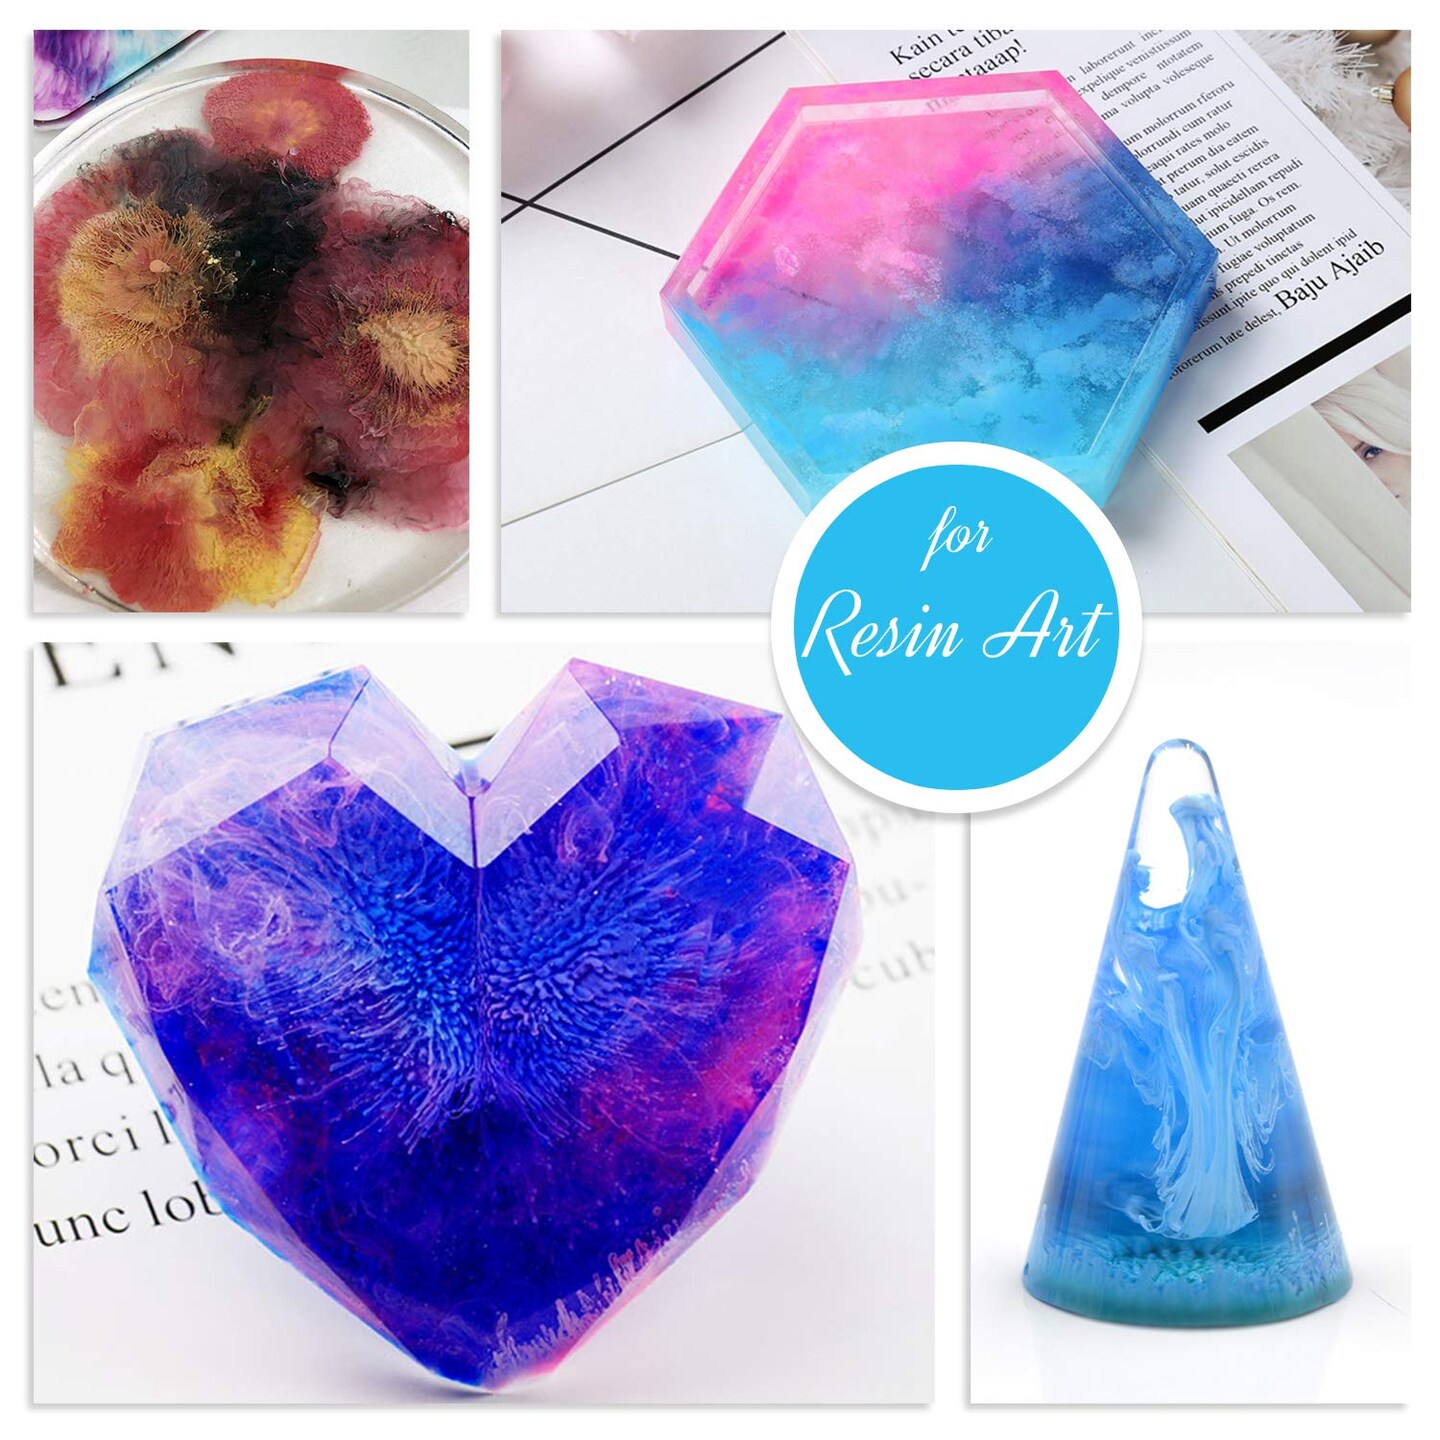 Coloring Diamond Dust with Alcohol Ink  Lets play with FloraCraft® Diamond  Dust from Michaels Stores and see how using Alchol Ink changes its color  and what it looks like! Also a